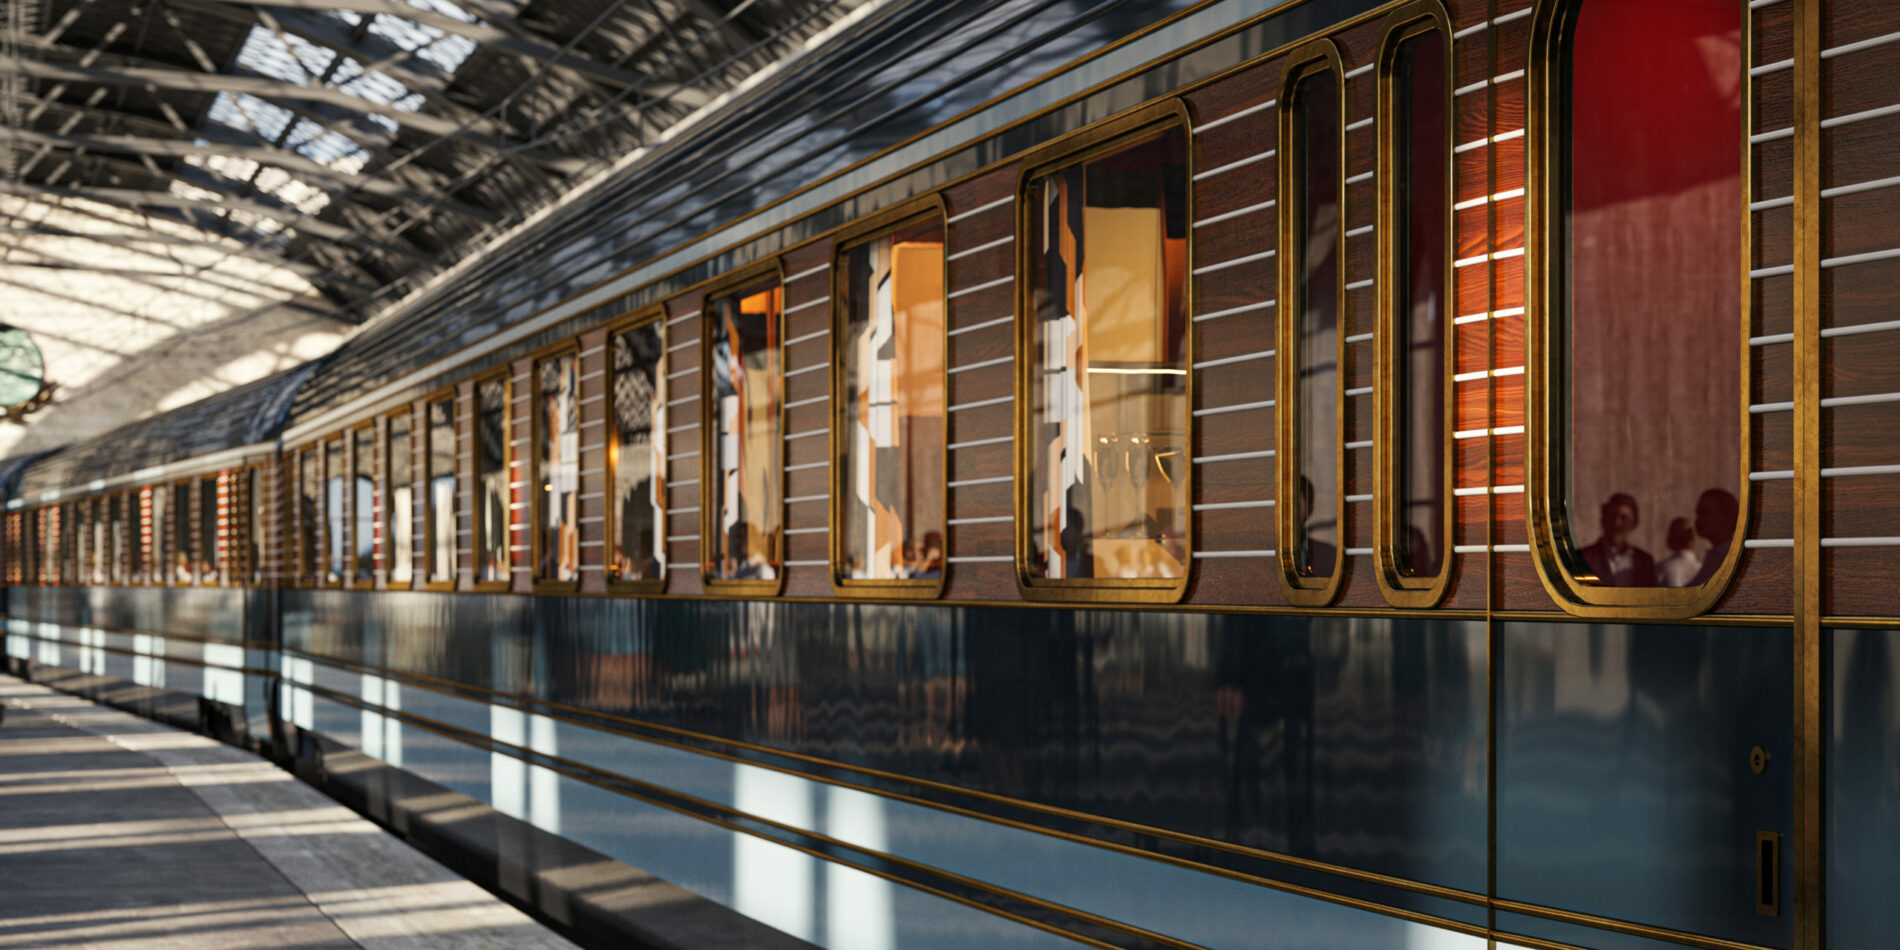 Famed luxury train is returning to Southeast Asia with two new routes